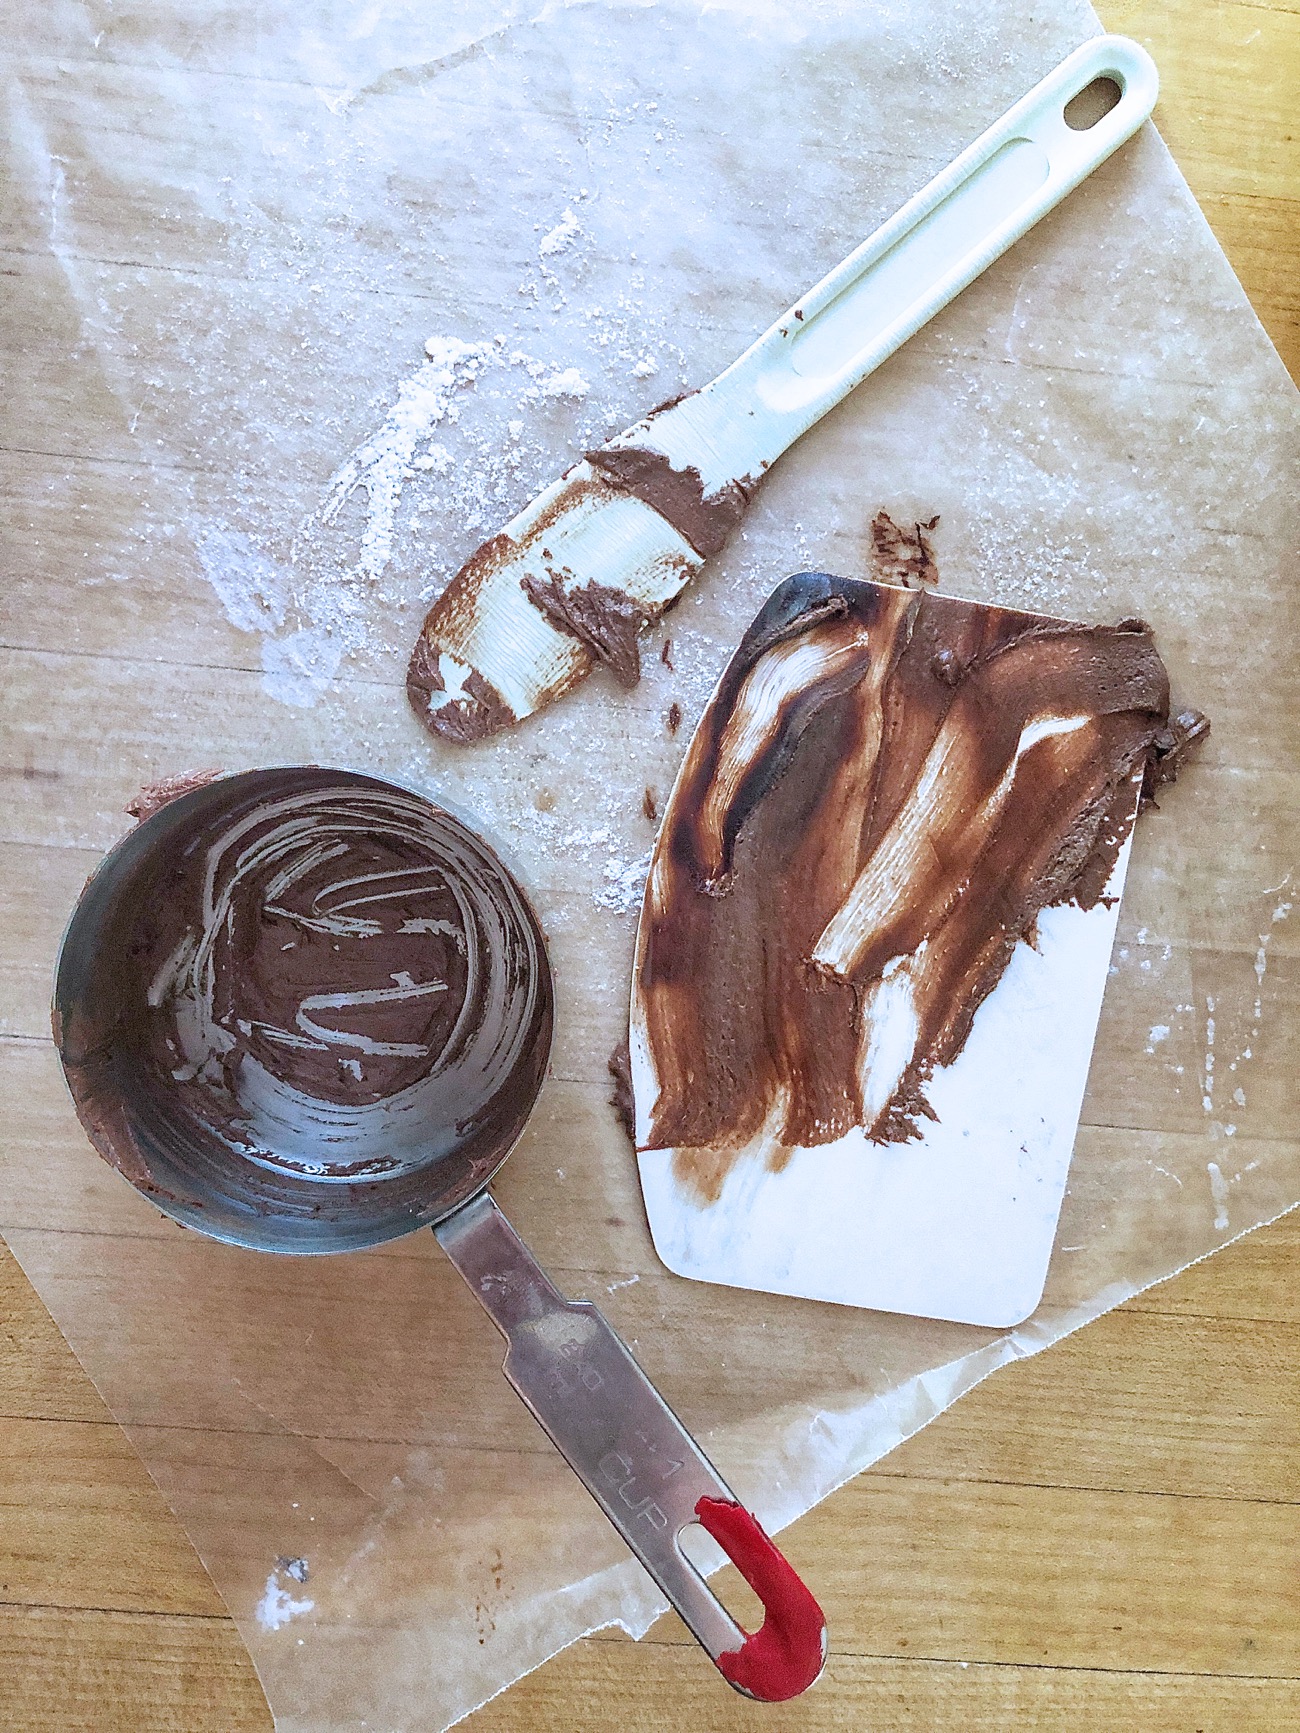 Measuring cup, spatula, and bowl scraper, all covered with chocolate frosting, set on a piece of waxed paper.